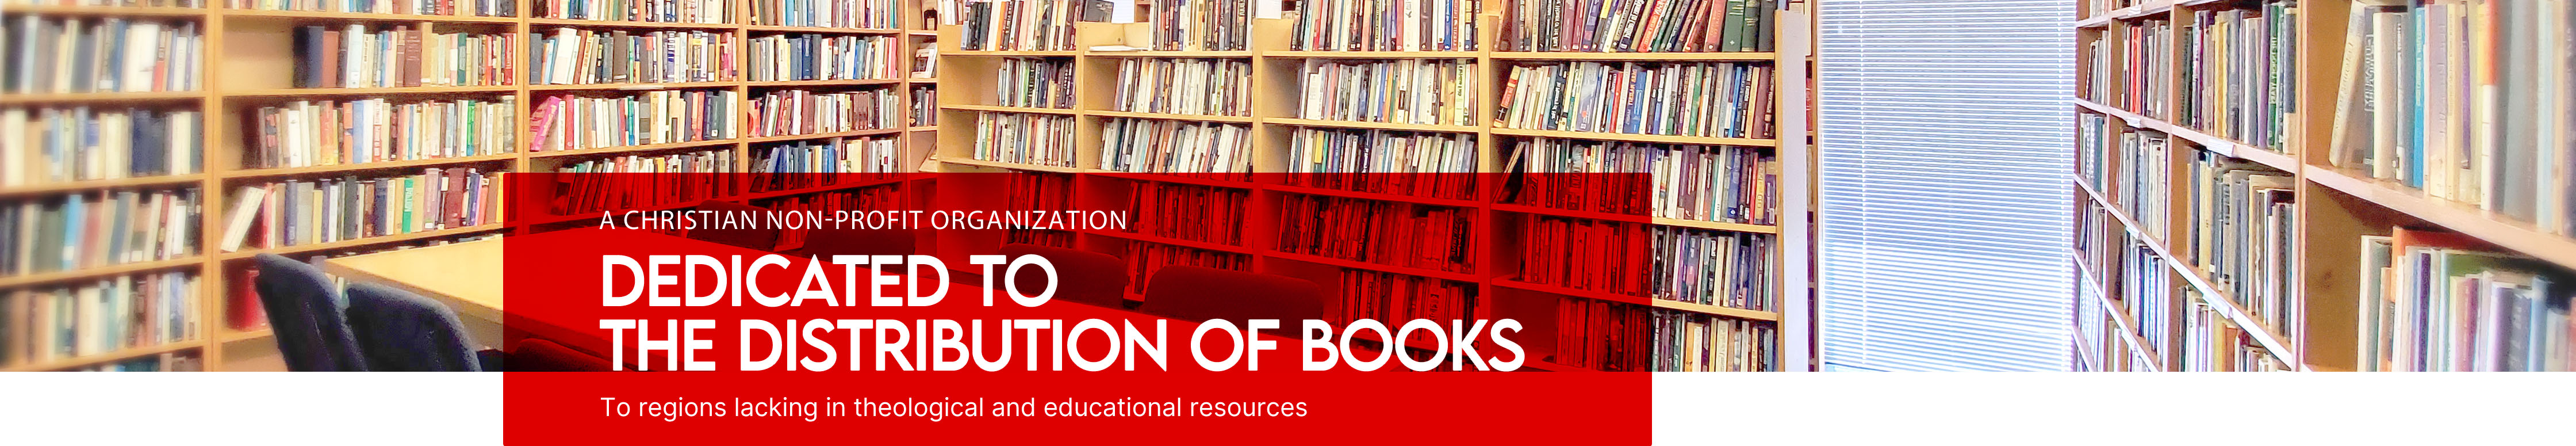 A christian non-profit organization dedicated to the distribution of books